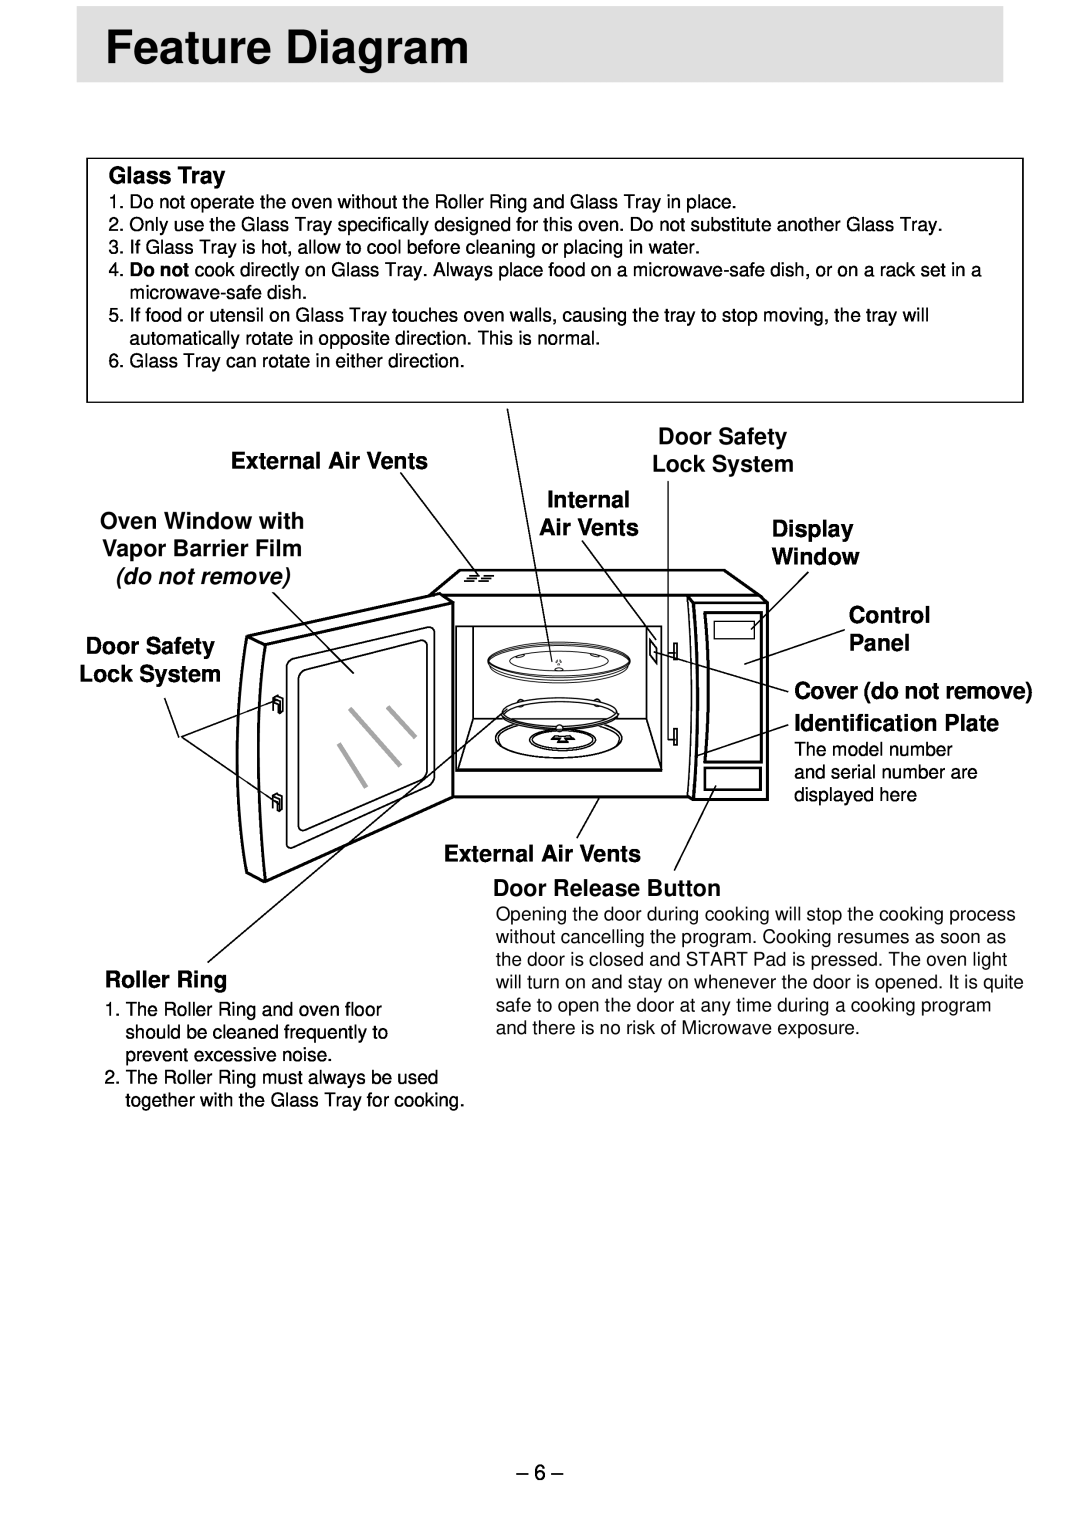 Panasonic NN-S781 manual Feature Diagram, Glass Tray, External Air Vents Oven Window with Vapor Barrier Film, do not remove 